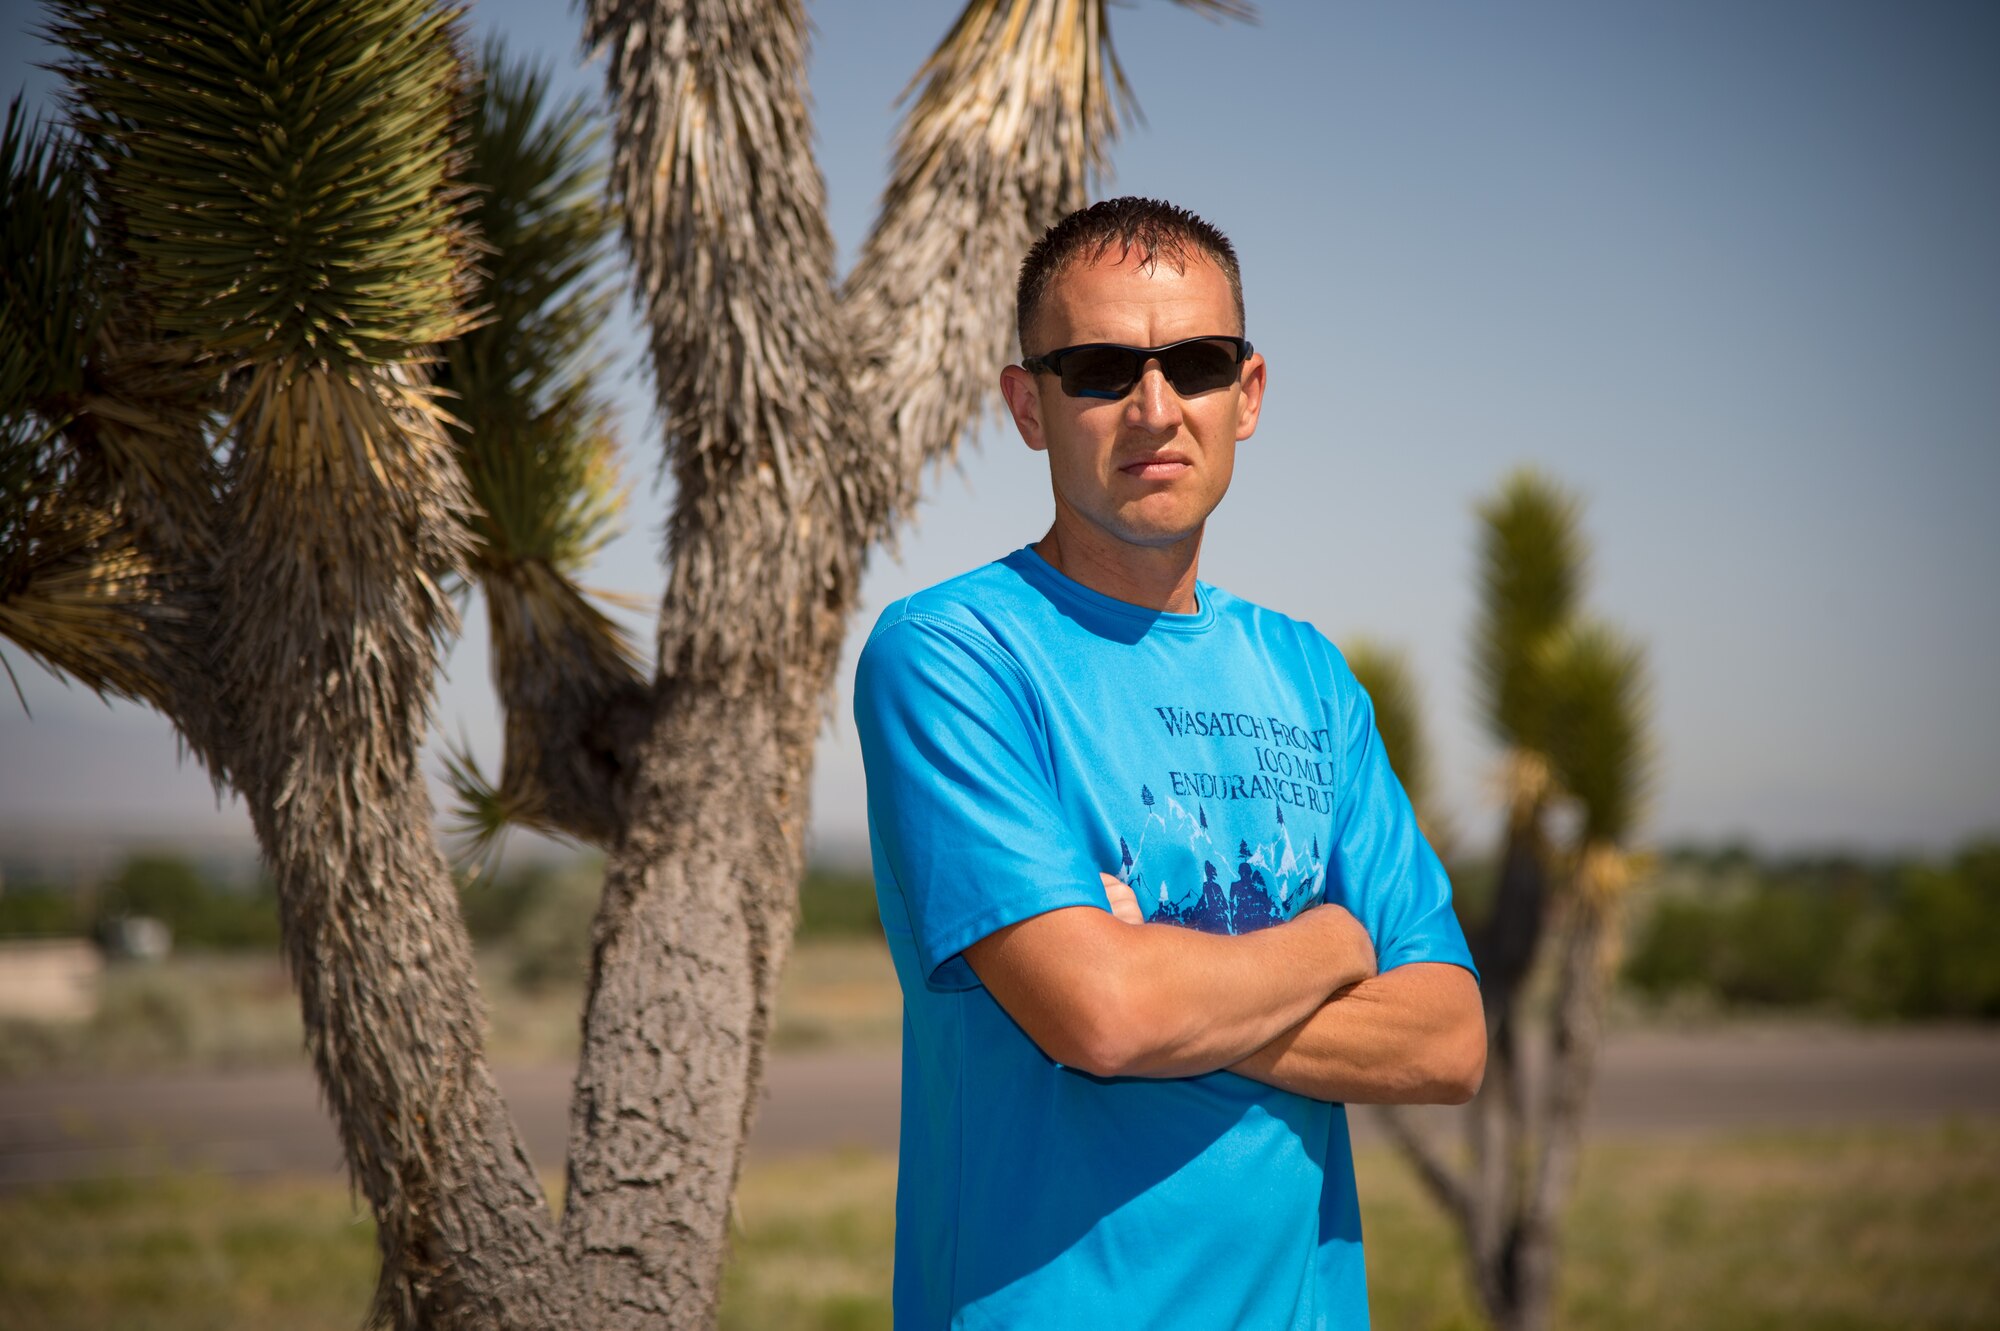 Capt. Jared Struck, an aircraft maintenance officer assigned to the Ogden Air Logistics Complex, poses before Joshua trees at Hill Air Force Base, Utah, June 27. Struck is training to run the Badwater ultramarathon in July. To prepare for the 135-mile race, he runs 6 days and lifts 3 to 4 days per week. (U.S. Air Force photo by R. Nial Bradshaw)